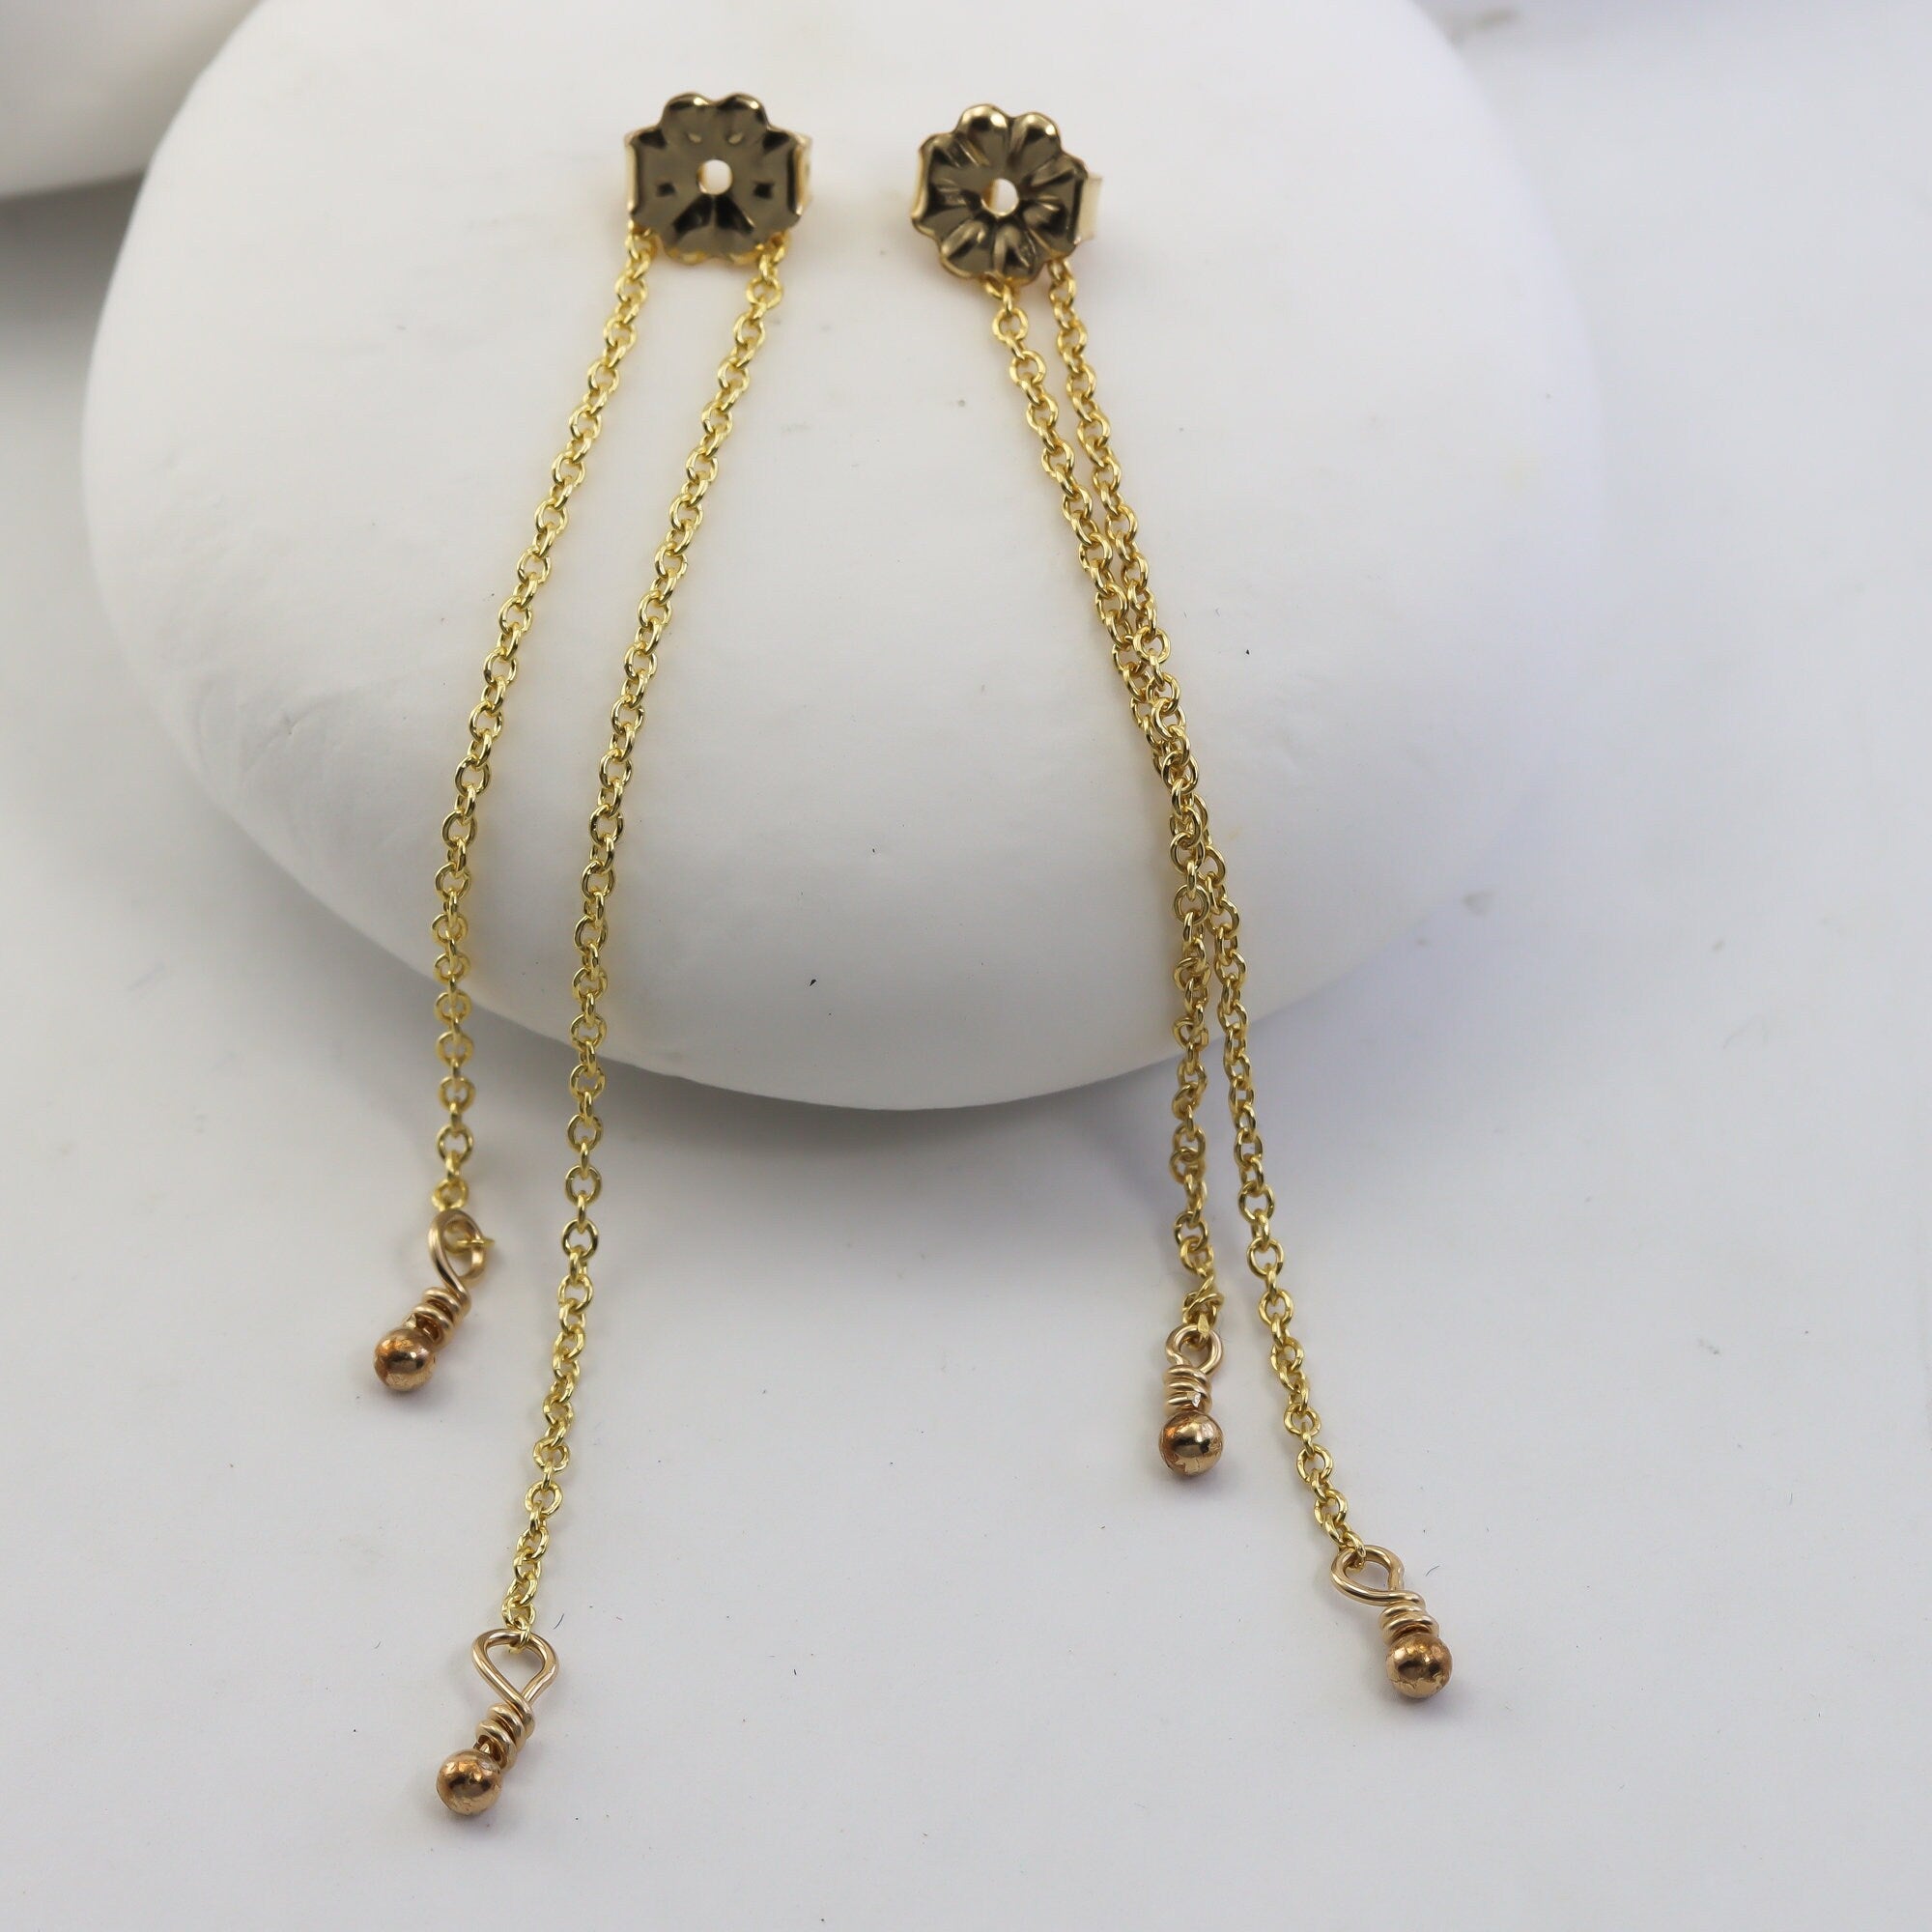 Dangle Earring Jackets with Herkimer Diamonds or Simple Drops in Silver or Gold Filled